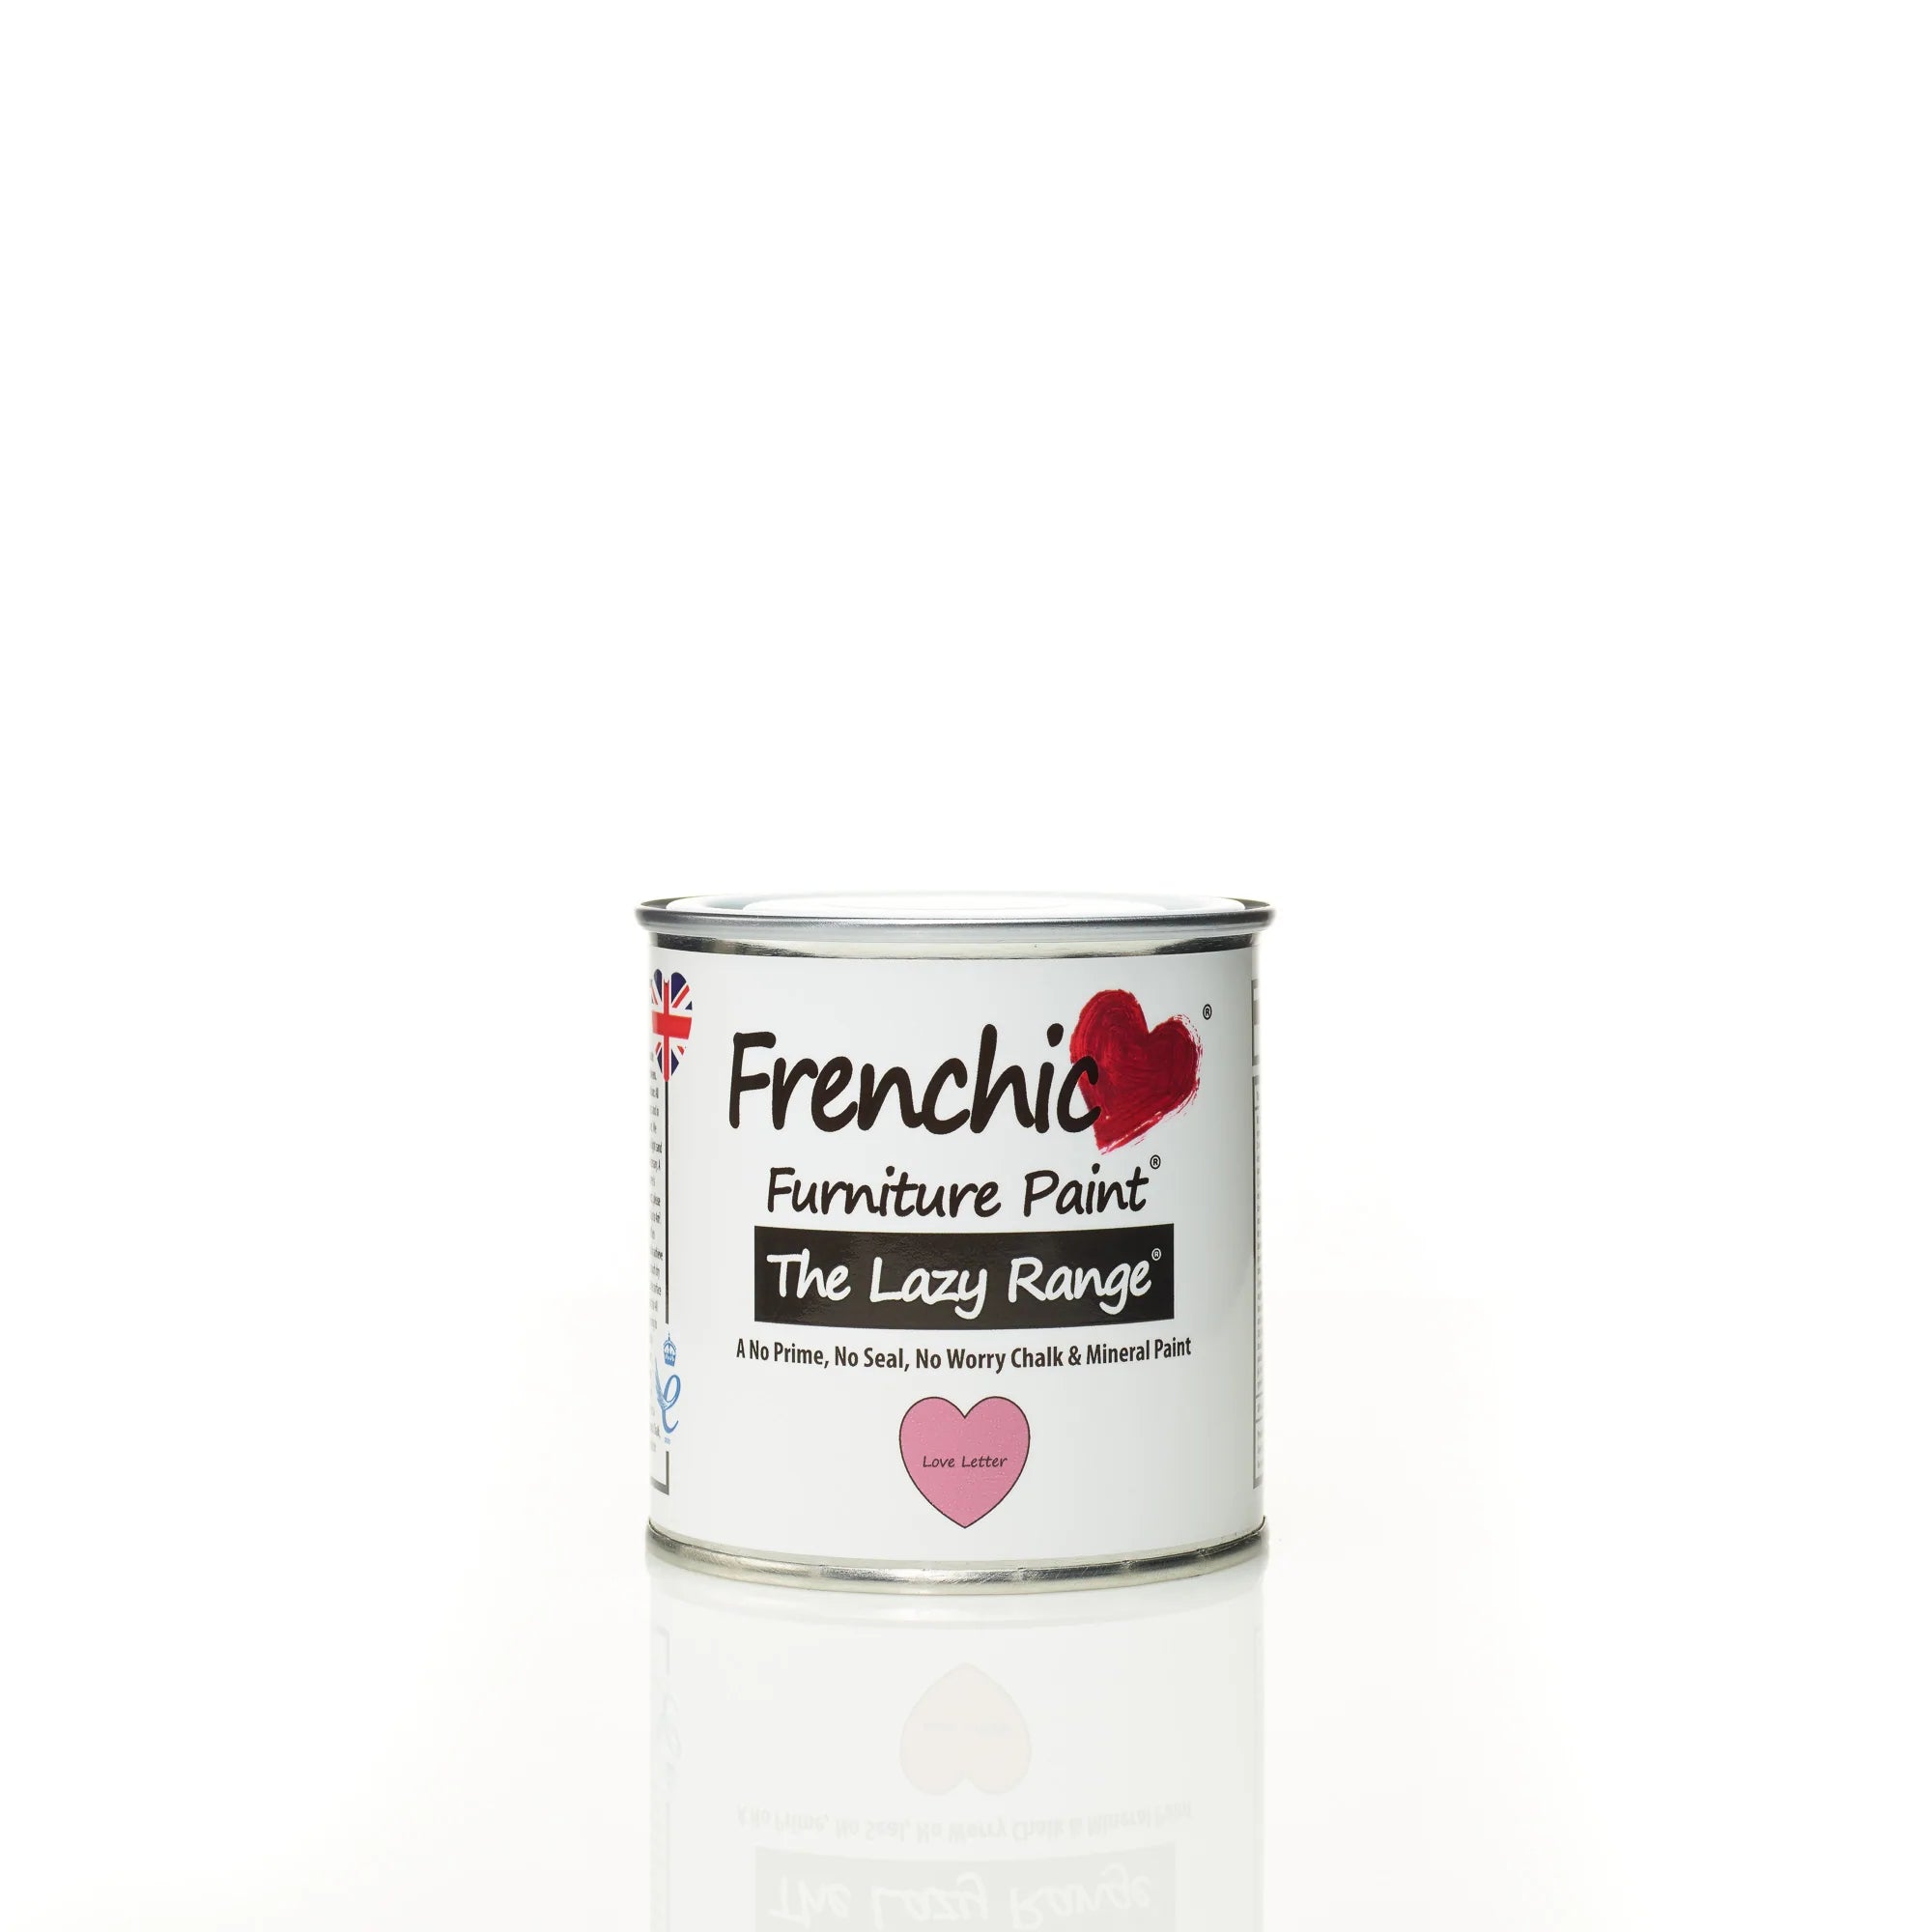 Frenchic Paint | Lazy Range - Love Letter by Weirs of Baggot St